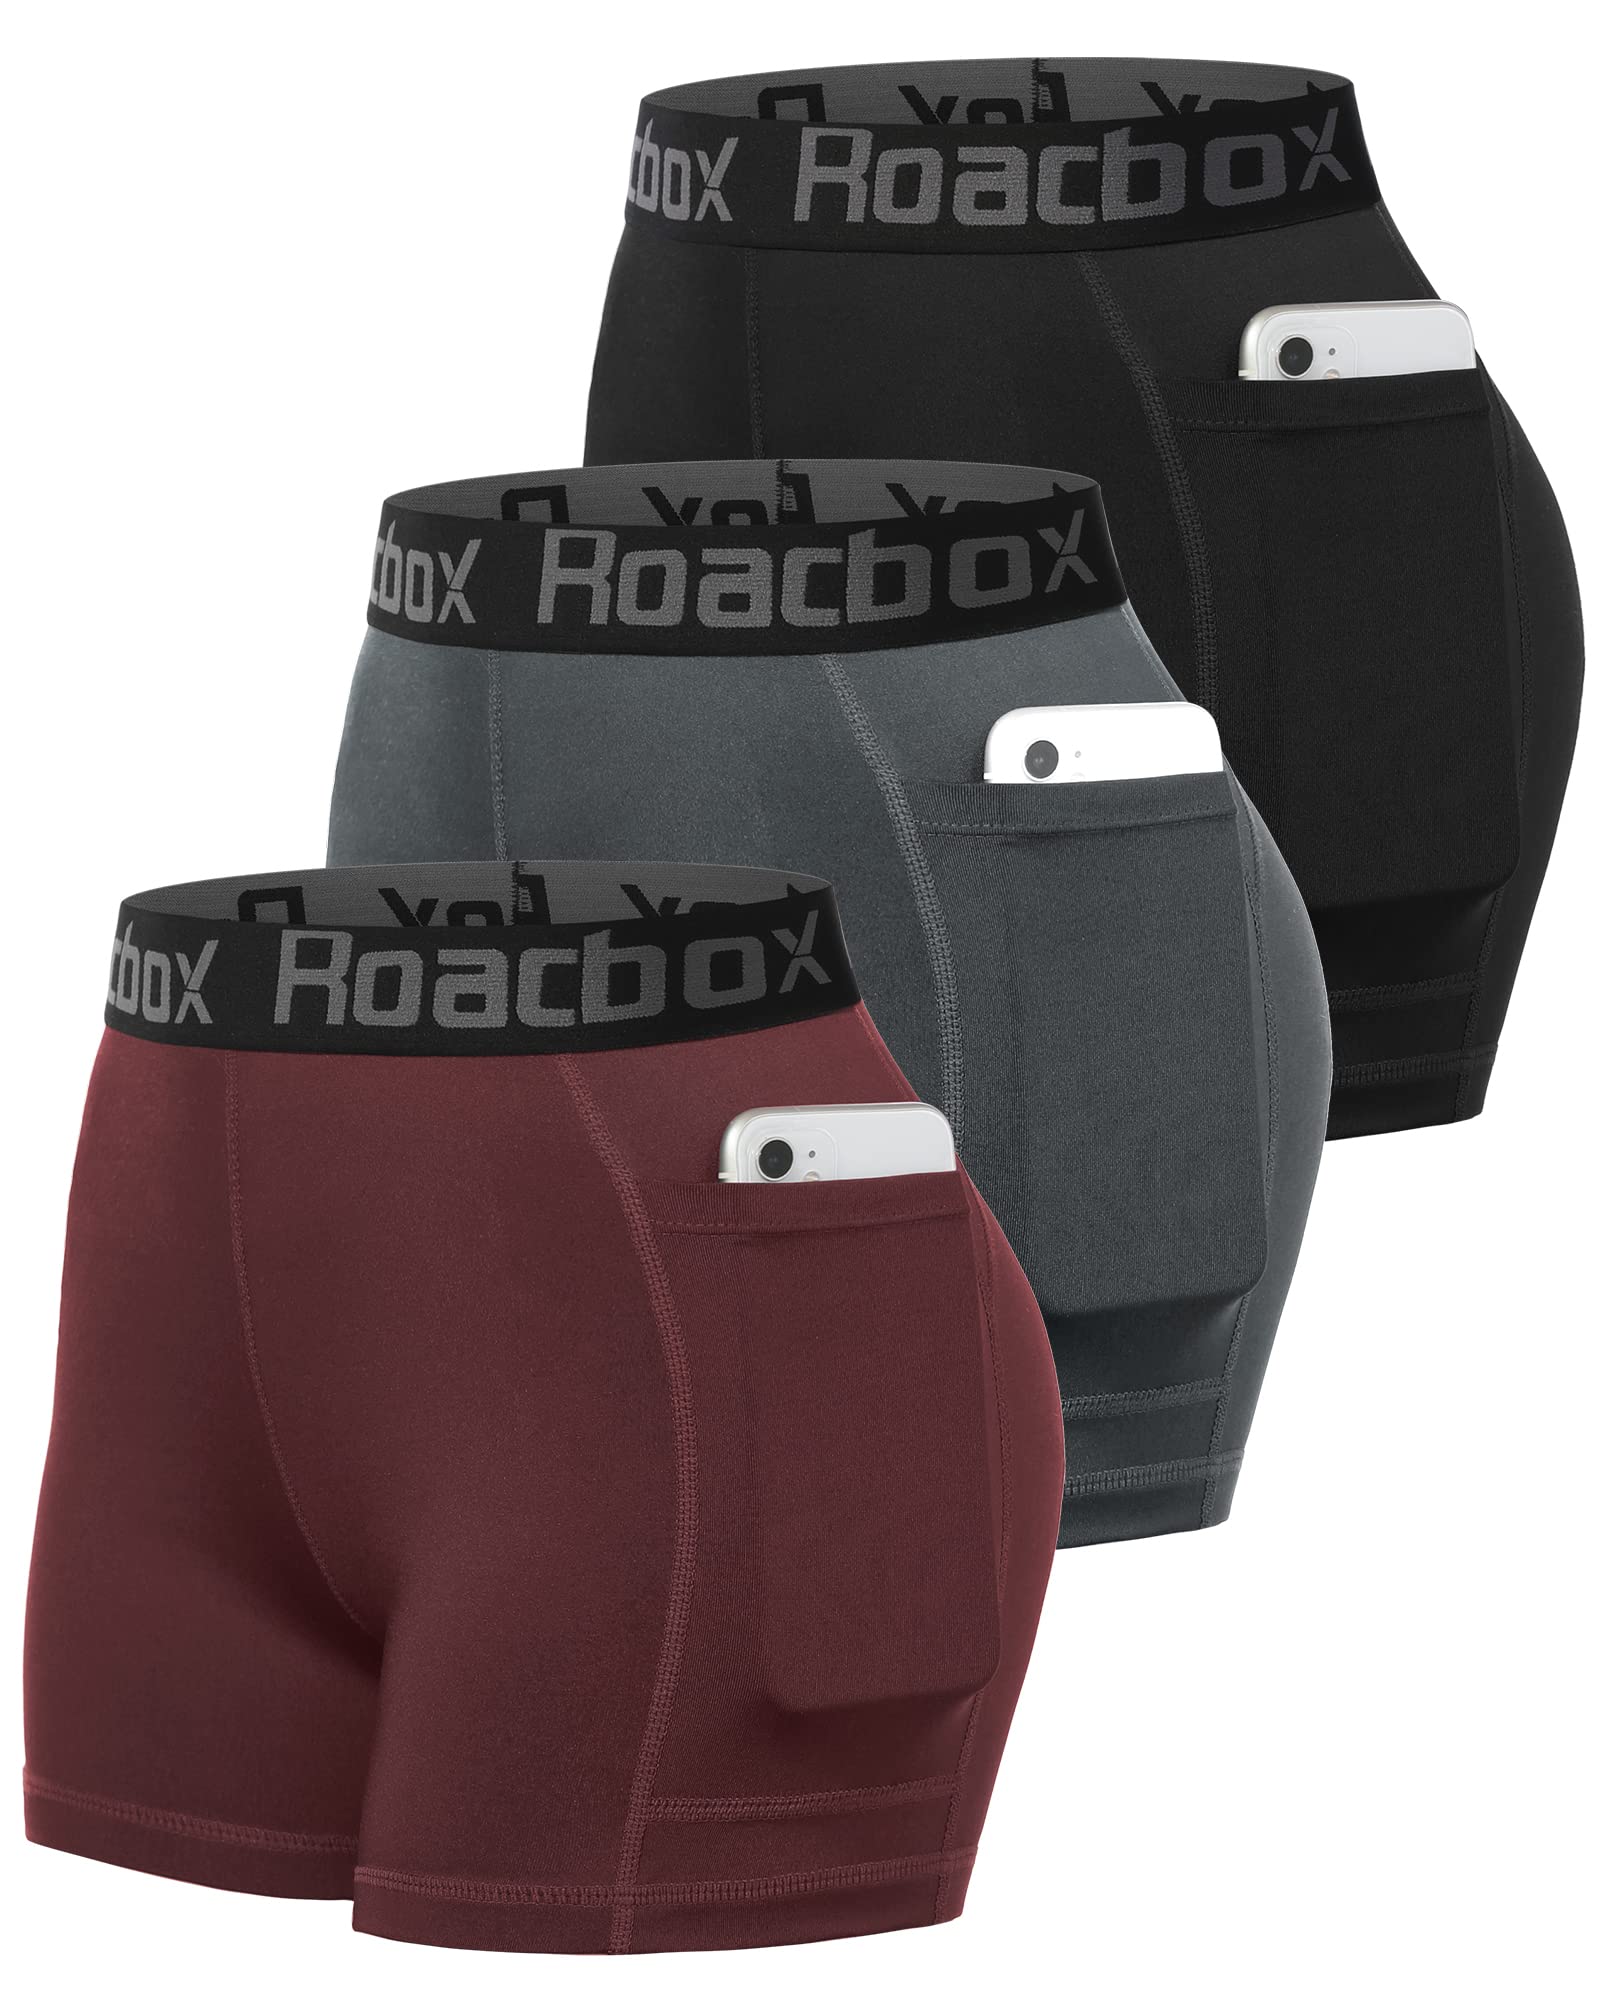 Roadbox Womens Spandex Shorts With Pockets: Ultra-Soft Tight Fit